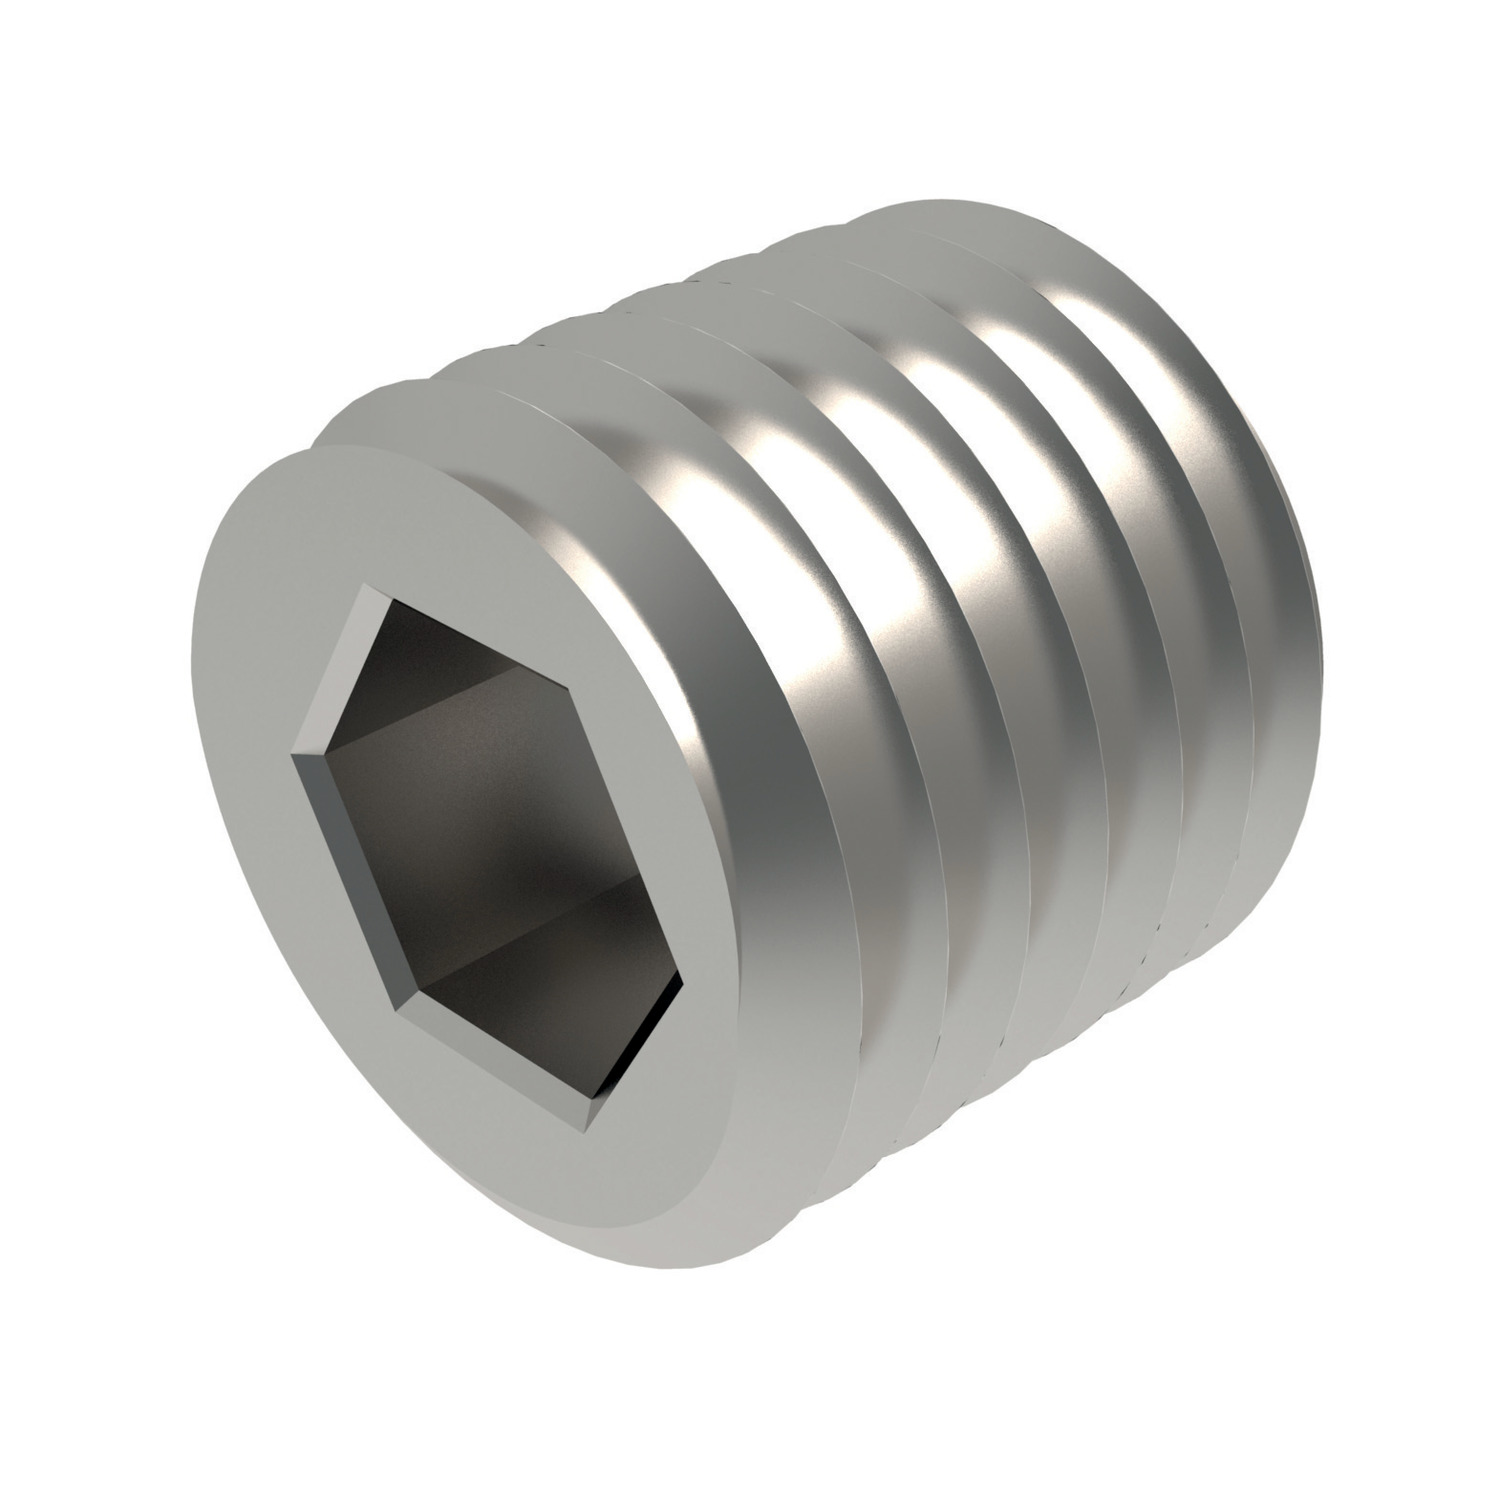 P0199.040-003-A2 Threaded Restrictor M4x.7 0.30 orifice A2 stainless steel. DANGER: Ensure this part is installed according to instructions in the product data sheet and installation notes. Holes must be completely free of oil, grease and debris.